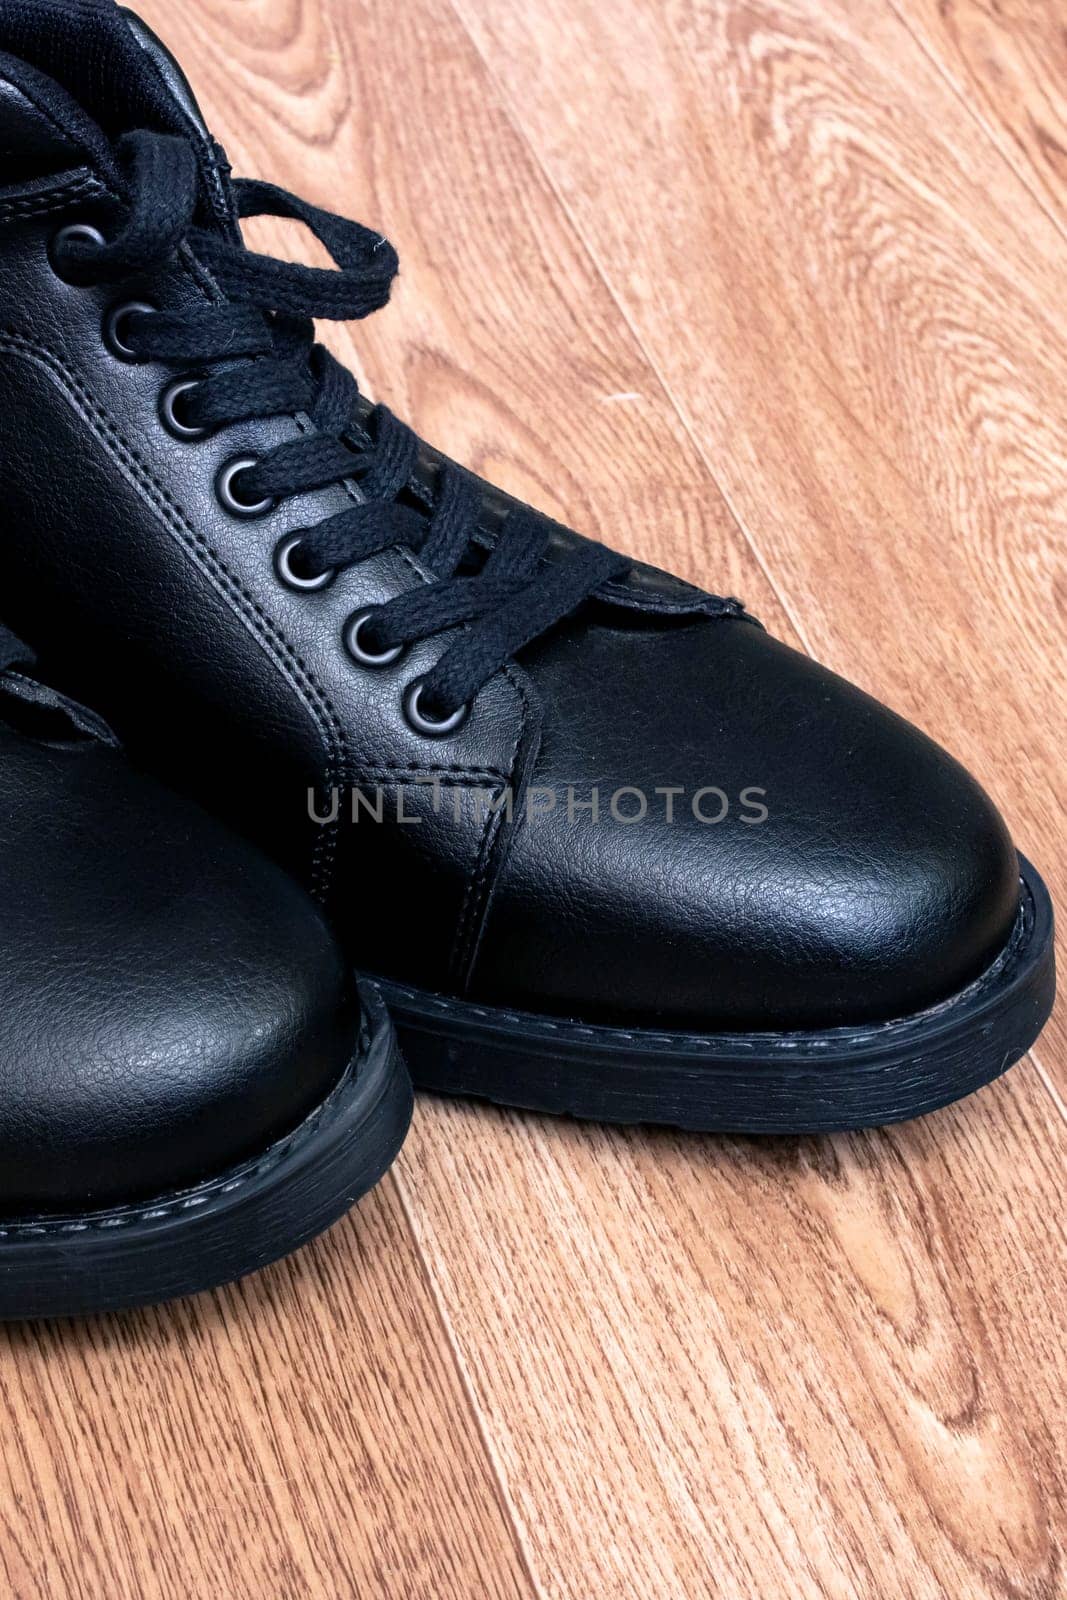 Black leather mens boots on wooden floor close up